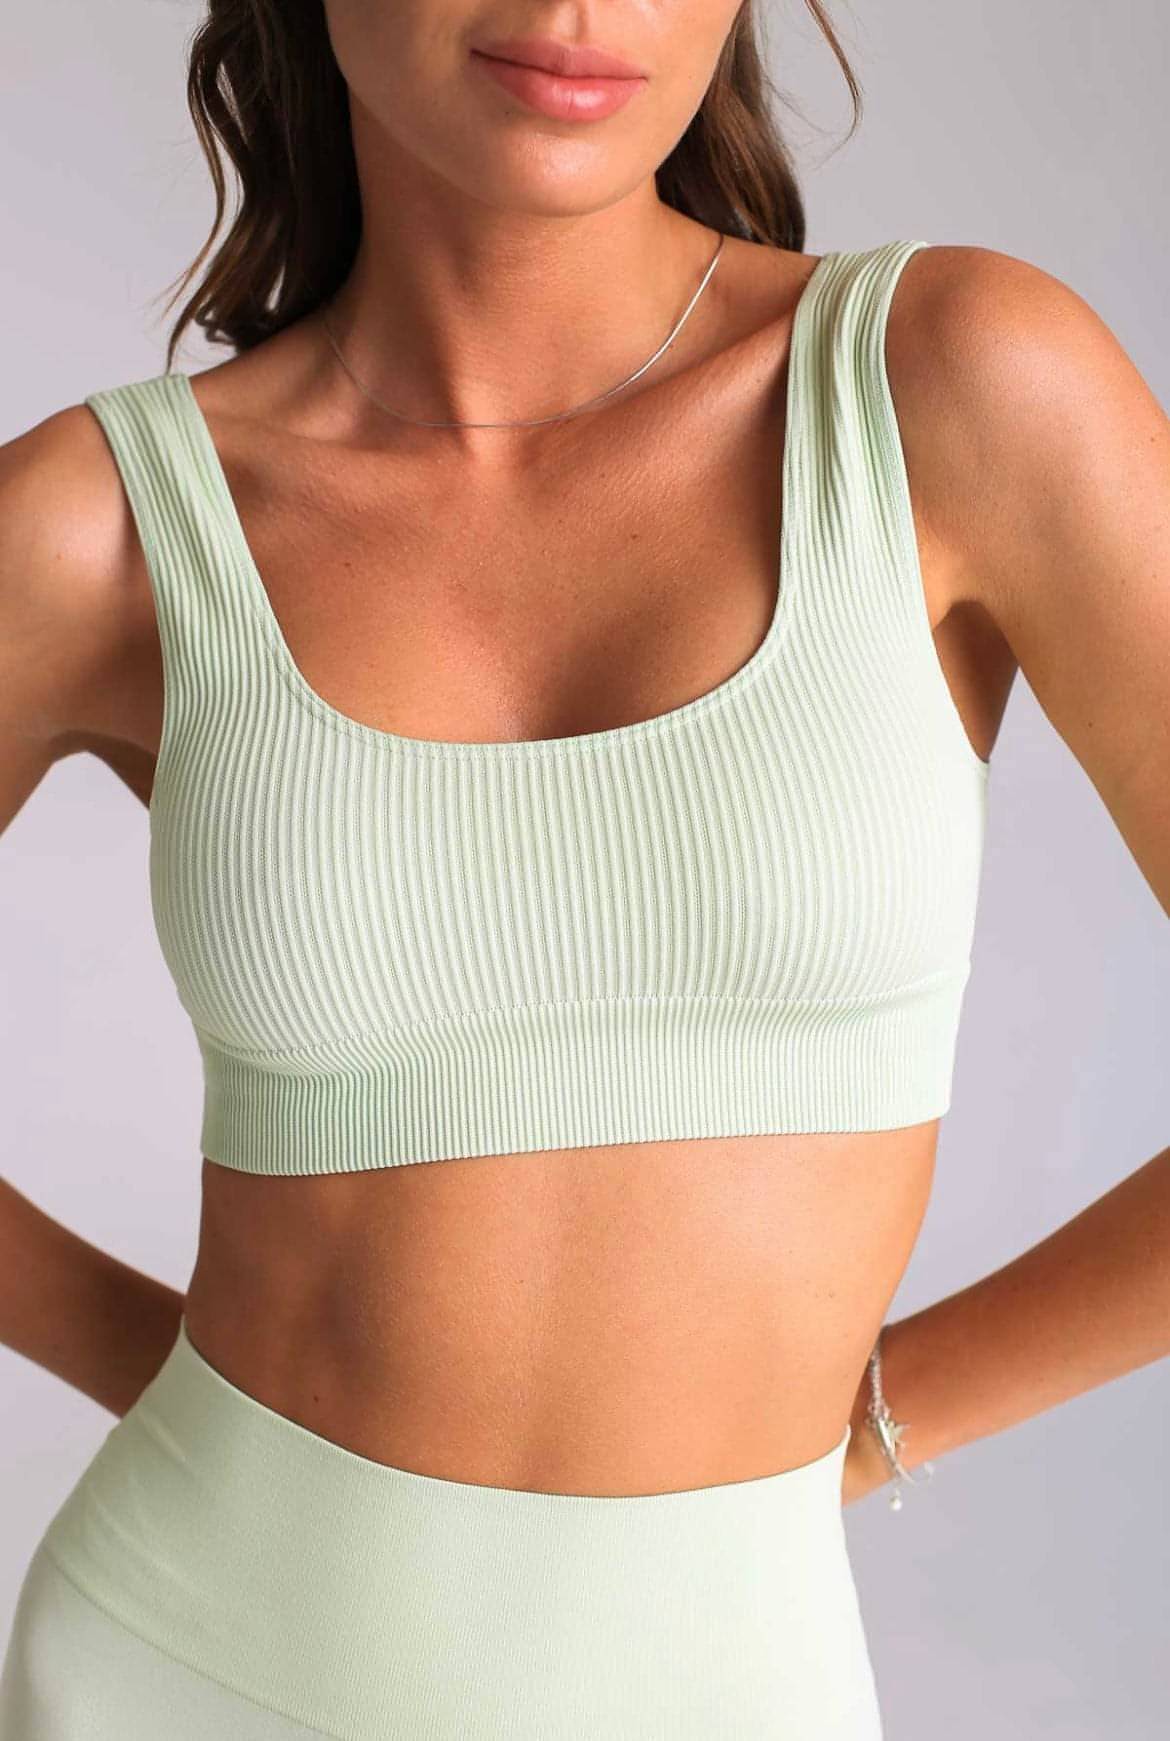 Get On The Green Rib Sports Bra, Activewear Indonesia